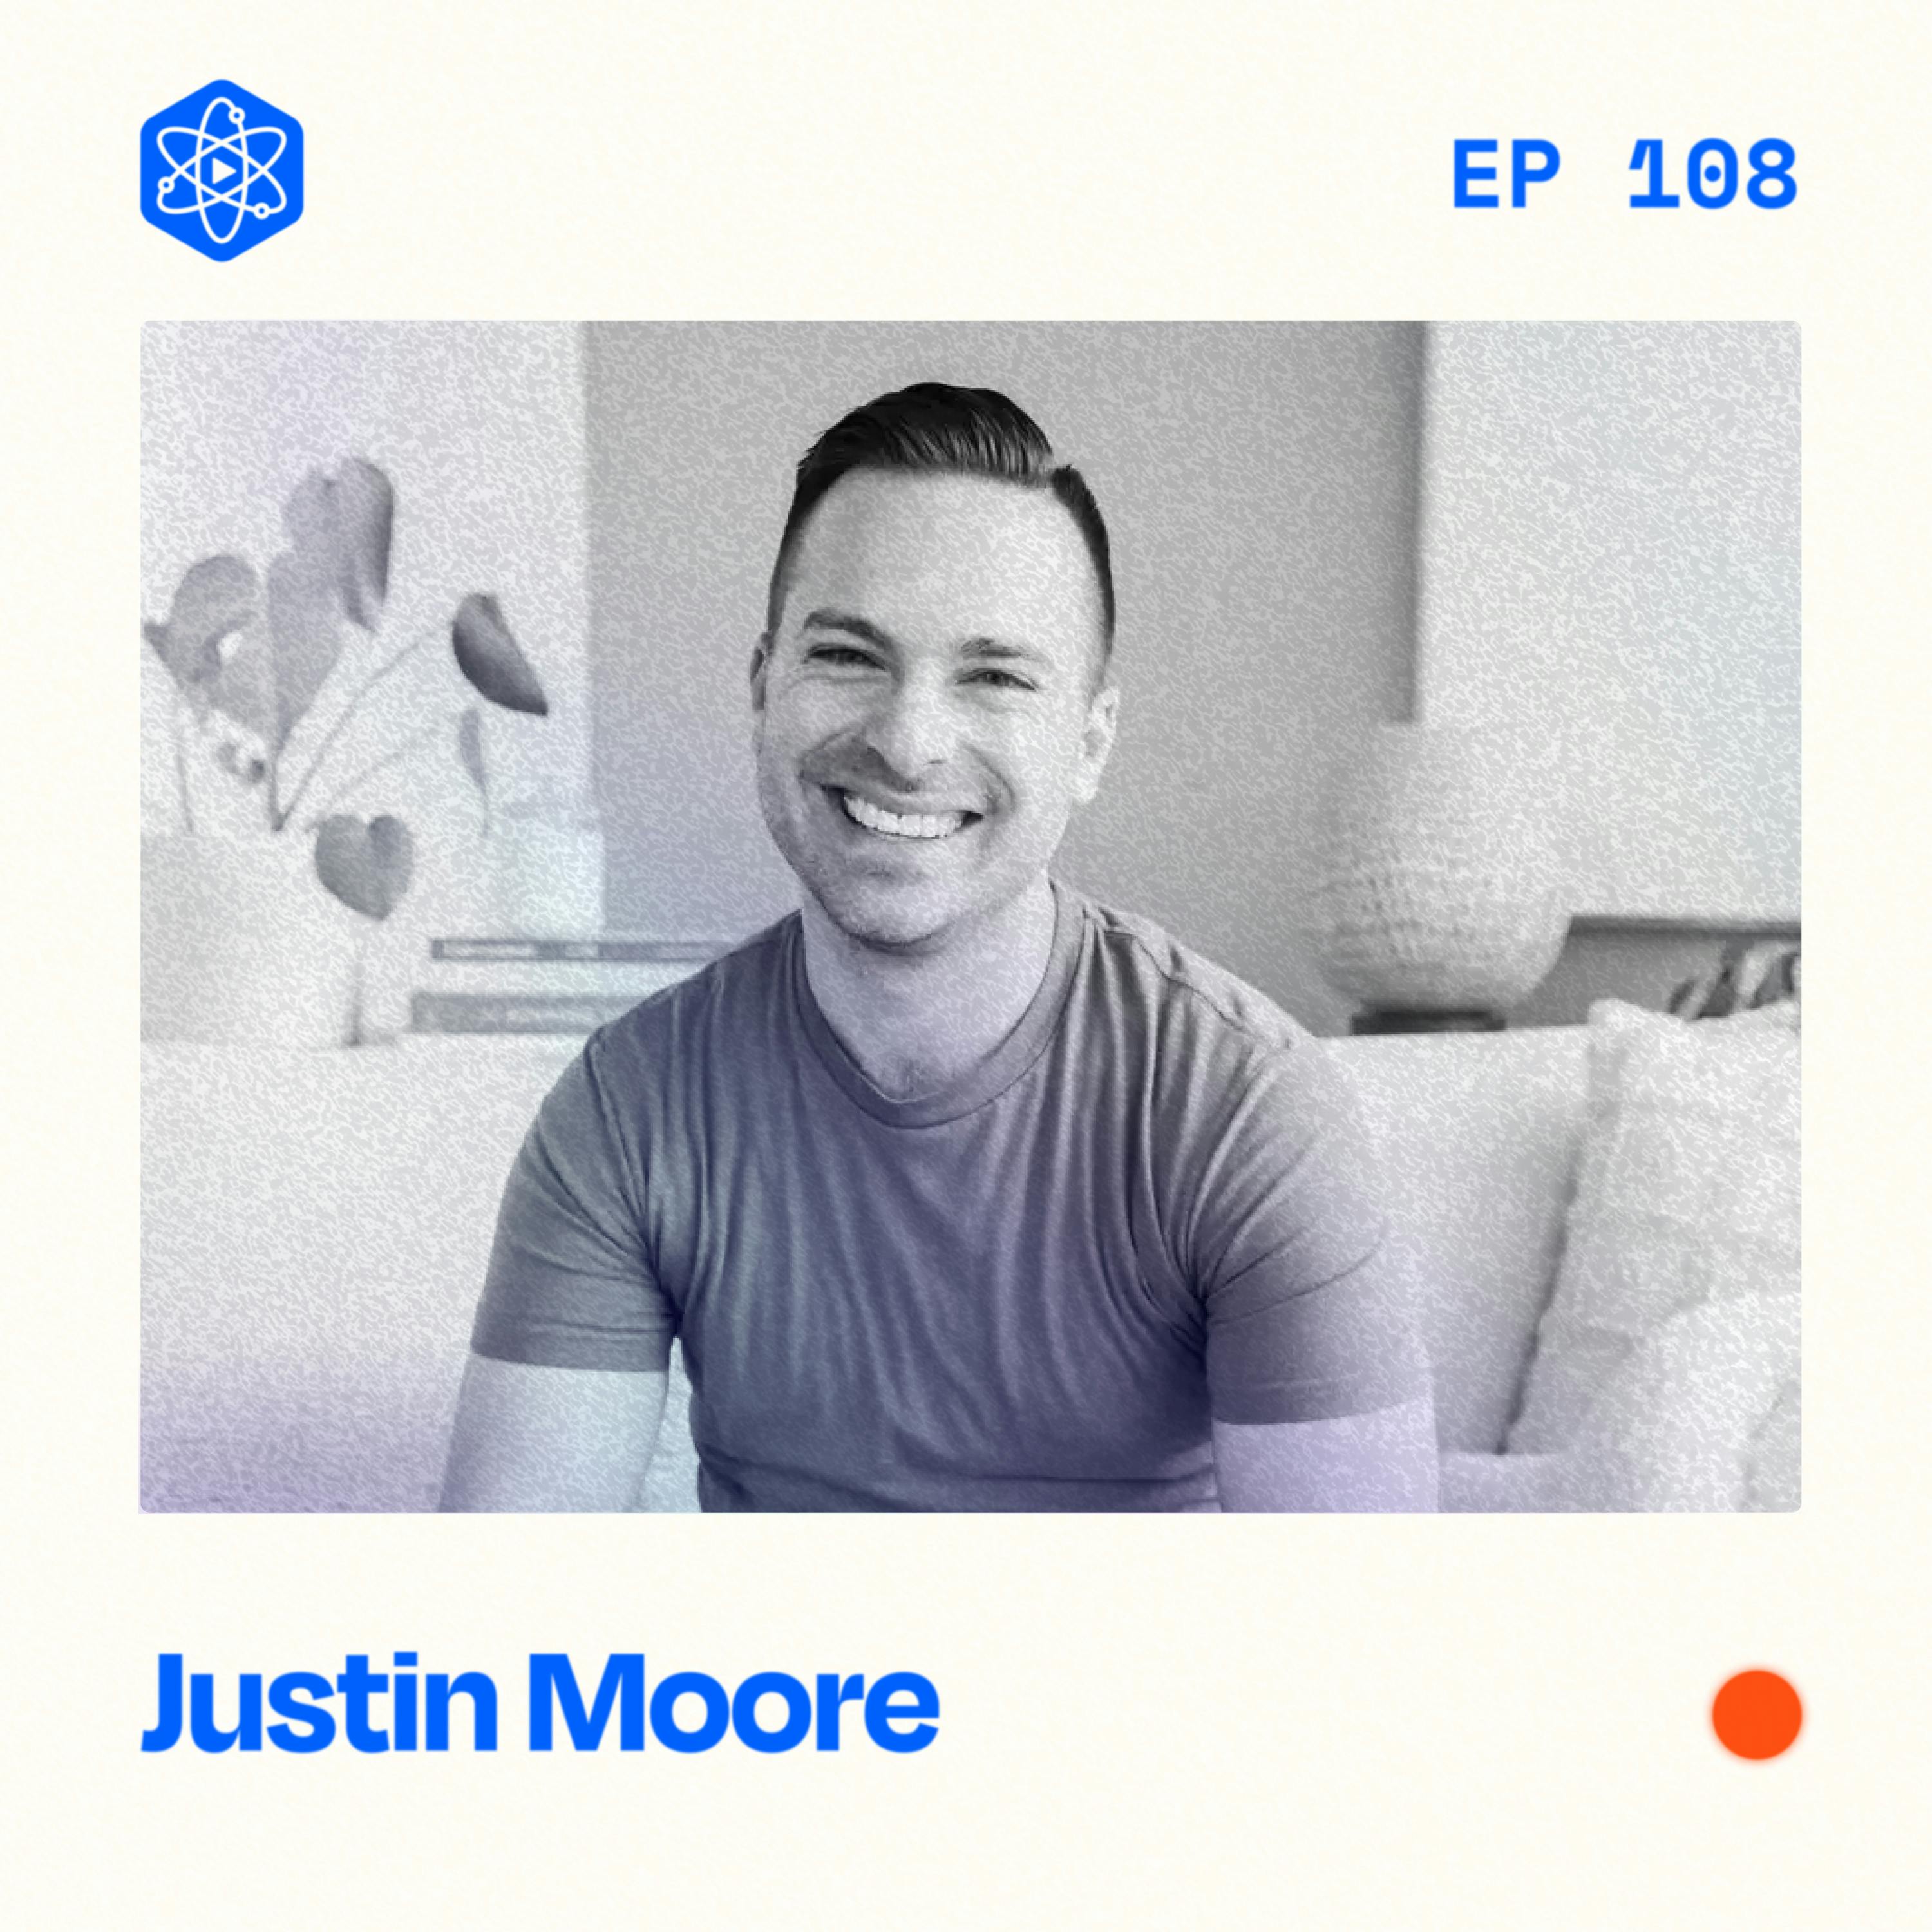 Justin Moore – How to get brand deals and why they are underrated